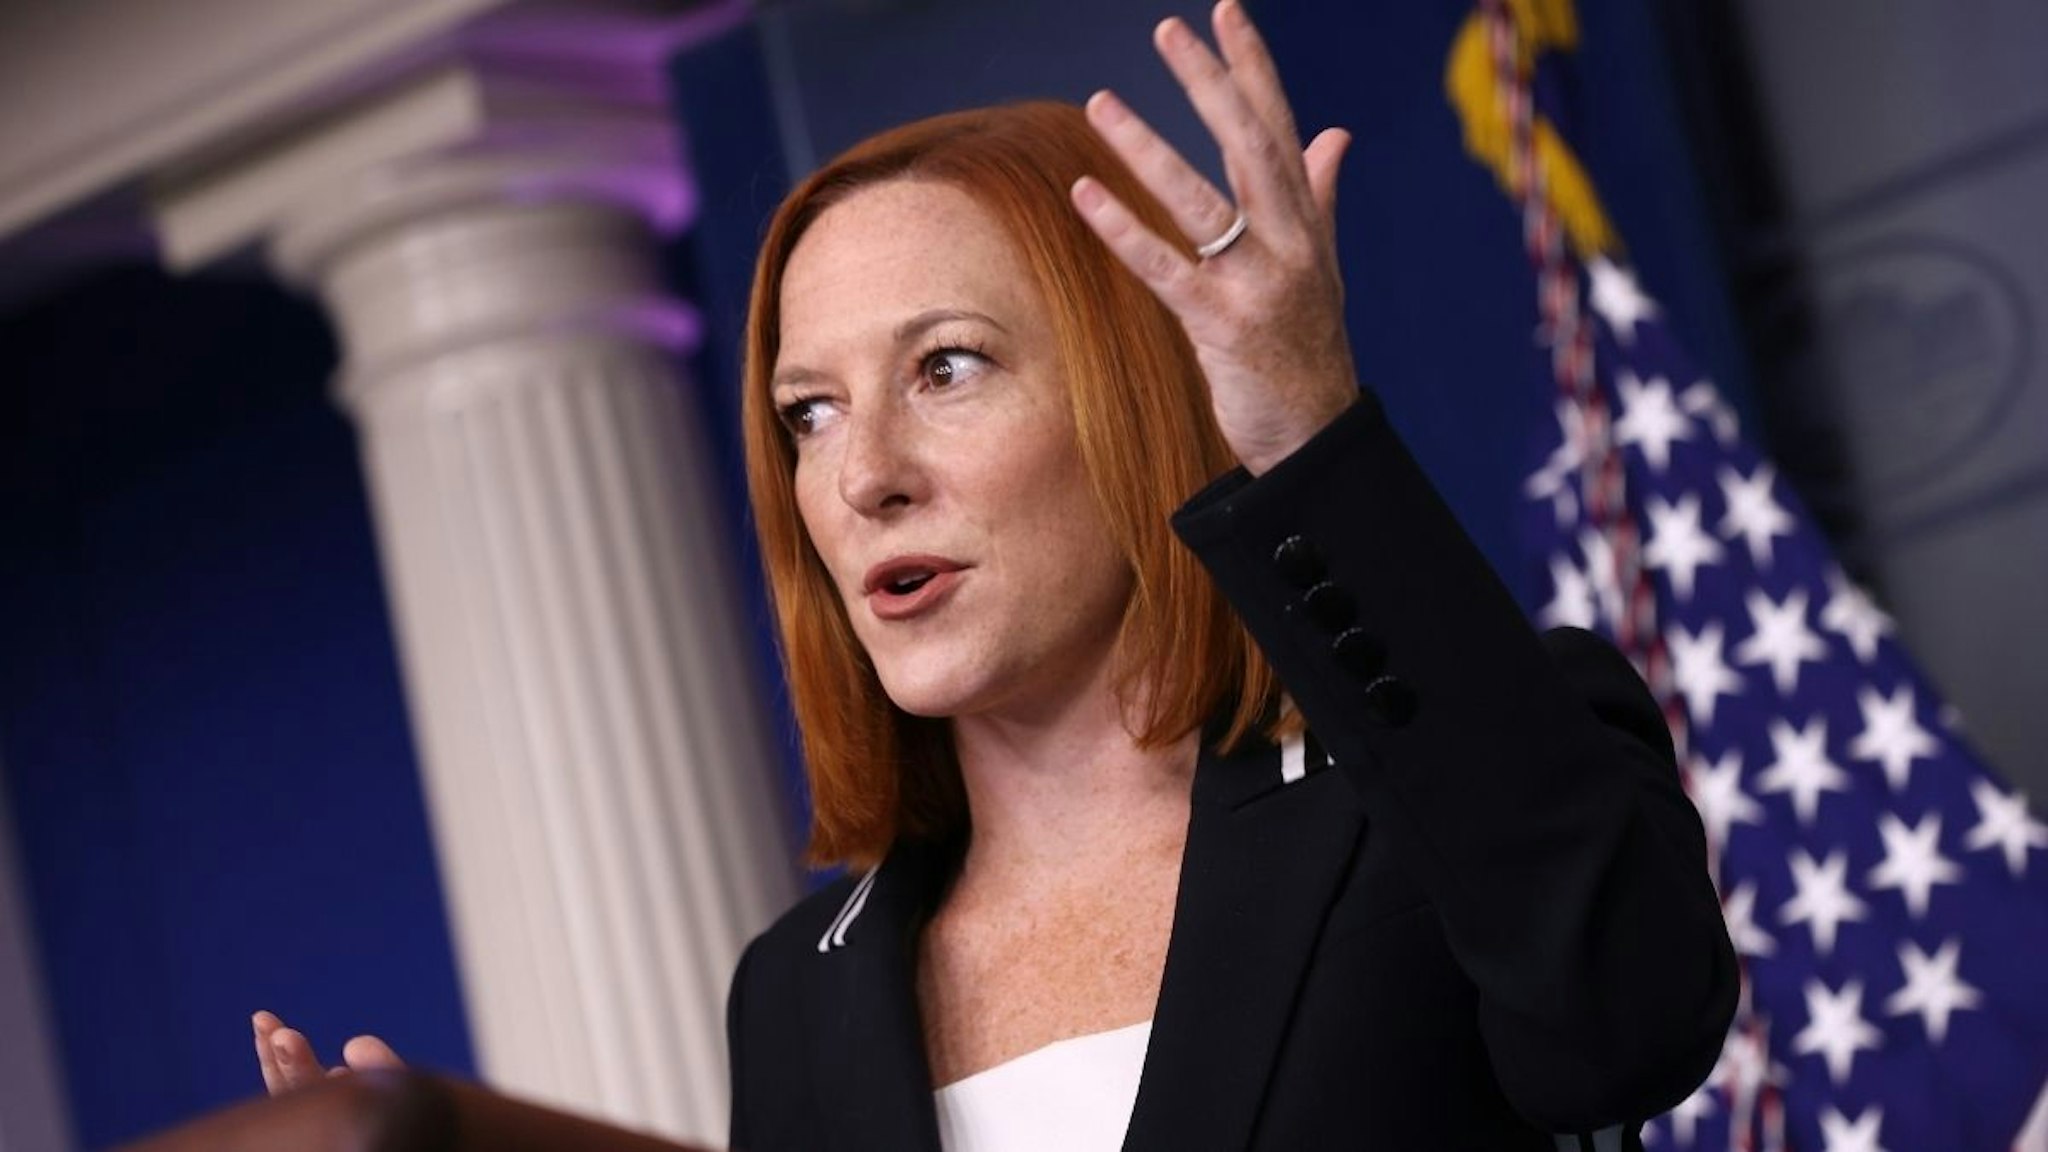 White House Press Secretary Jen Psaki talks to reporters during the daily news conference in the Brady Press Briefing Room at the White House on September 02, 2021 in Washington, DC.